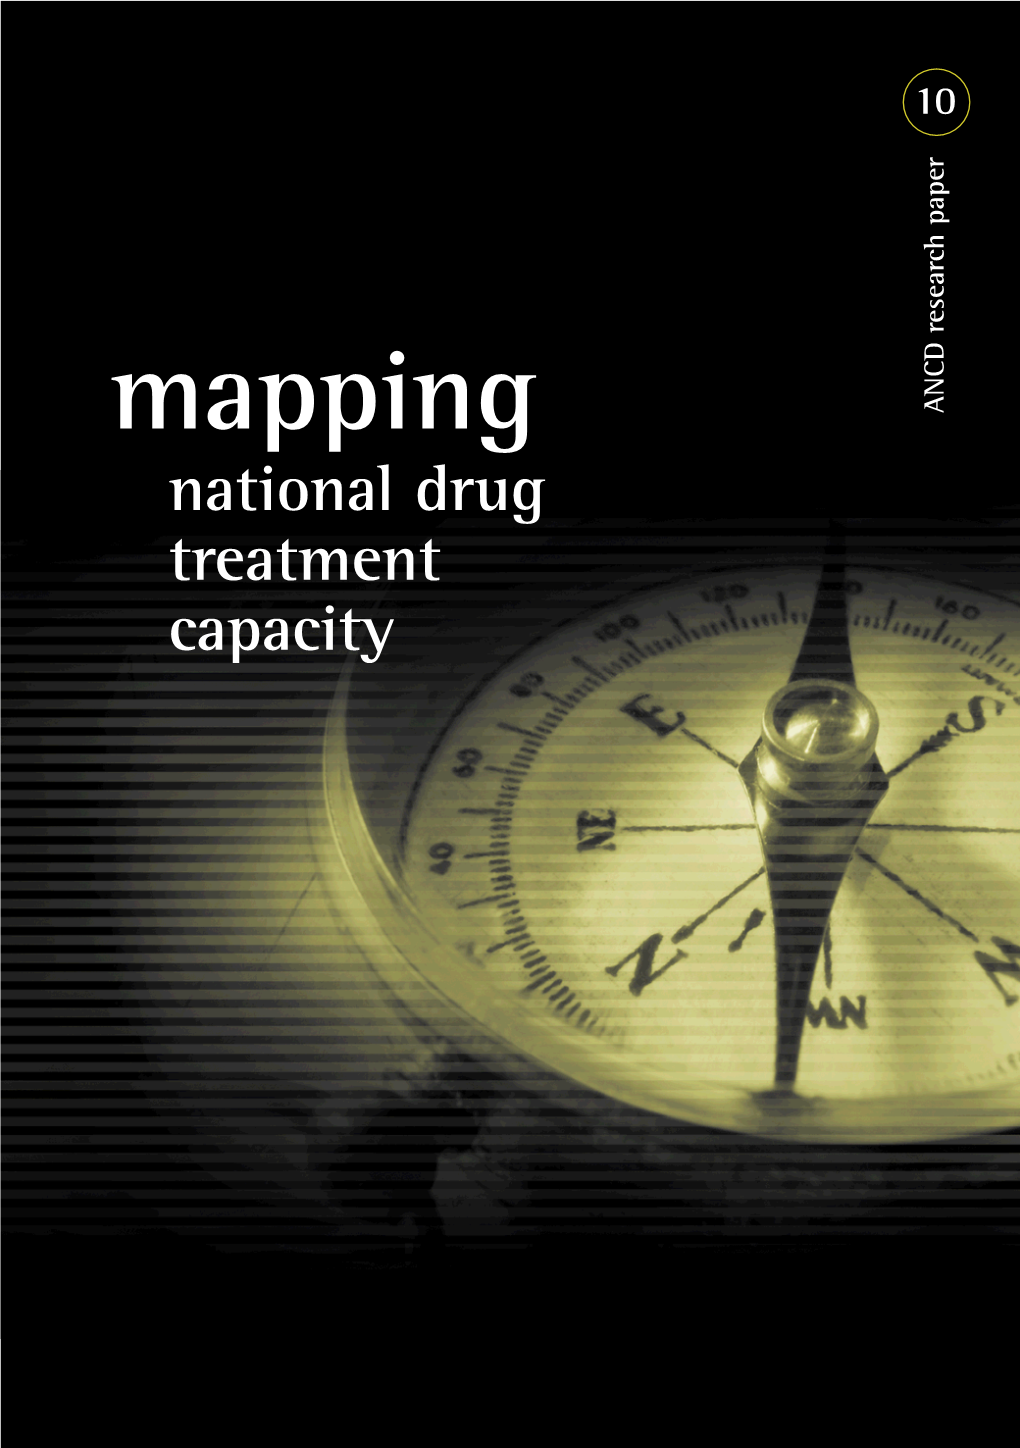 Mapping Capacity Treatment National Drug